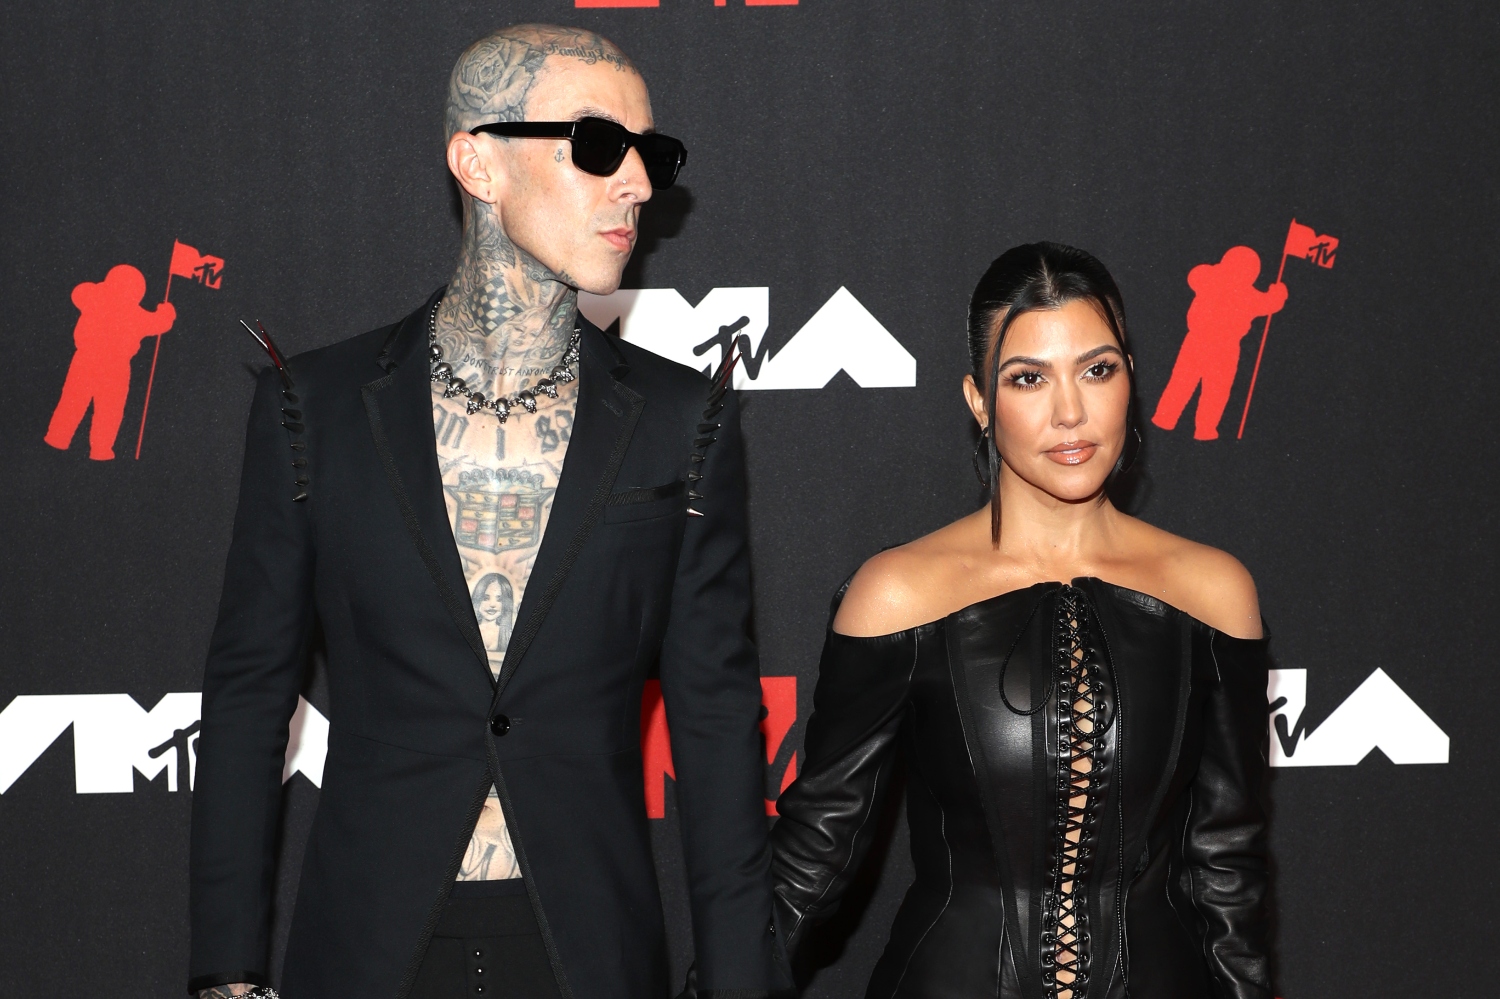 Travis Barker and Kourtney Kardashian attend the 2021 MTV Video Music Awards at Barclays Center on September 12, 2021. They recently announced that they had done a sex fast as part of a cleanse — but you don't need to copy them.